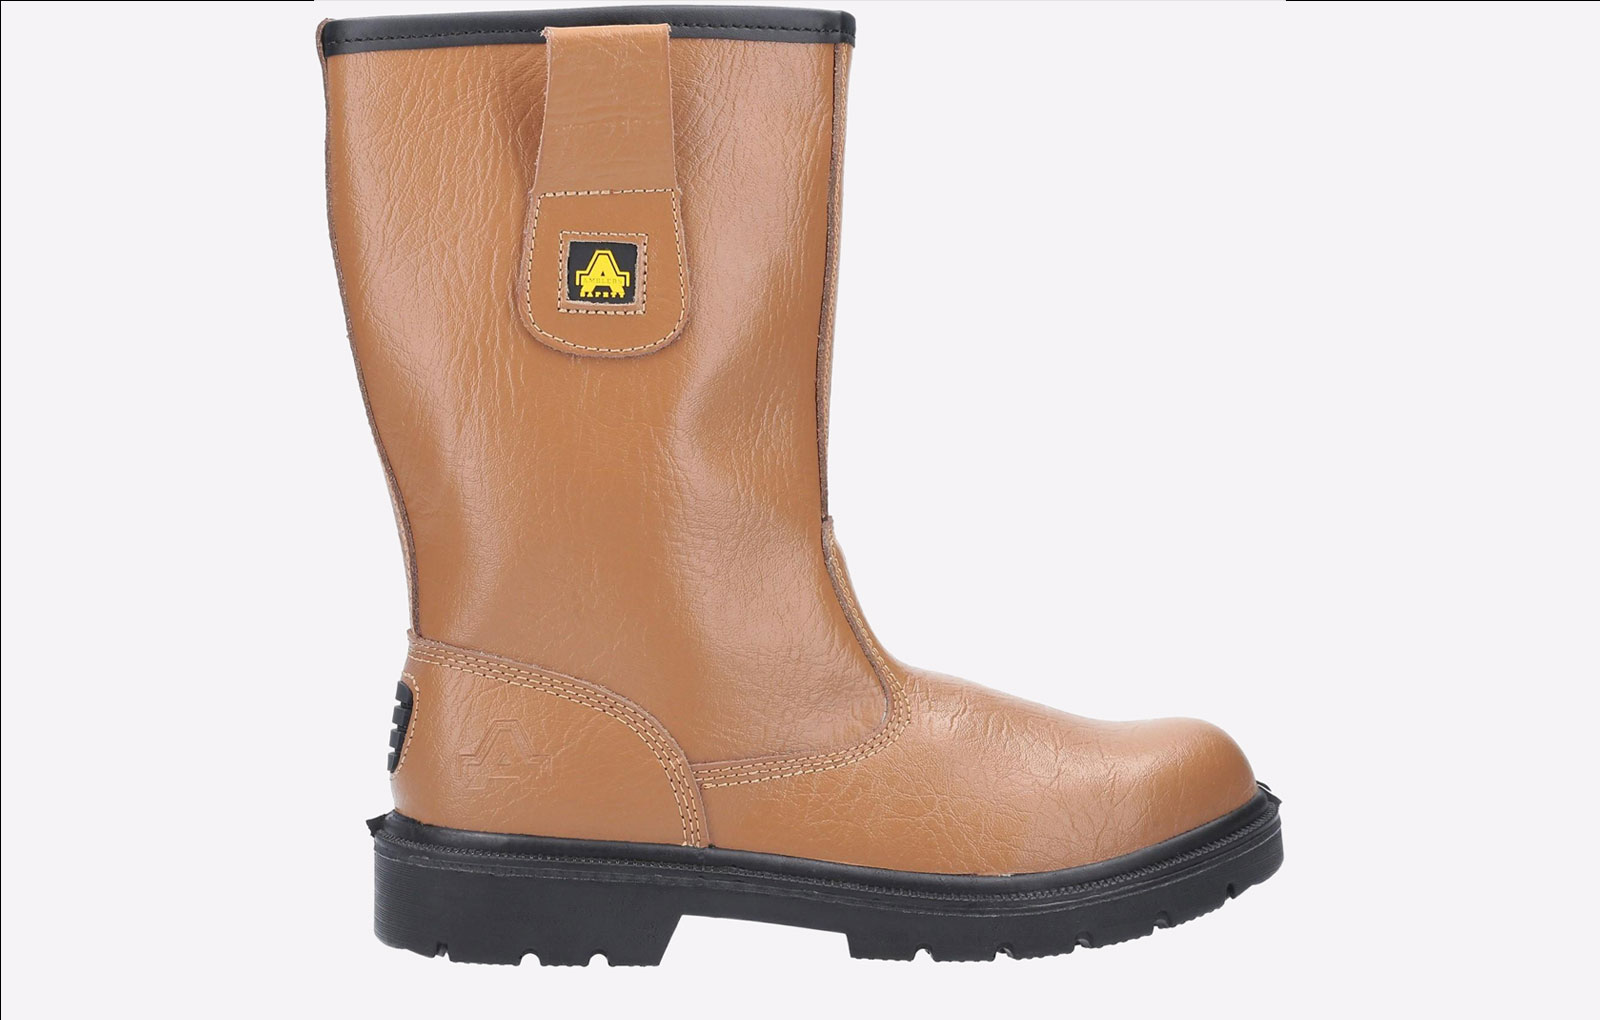 Amblers FS124 Water Resistant Safety Boot Mens - GRD-20426-32269-13